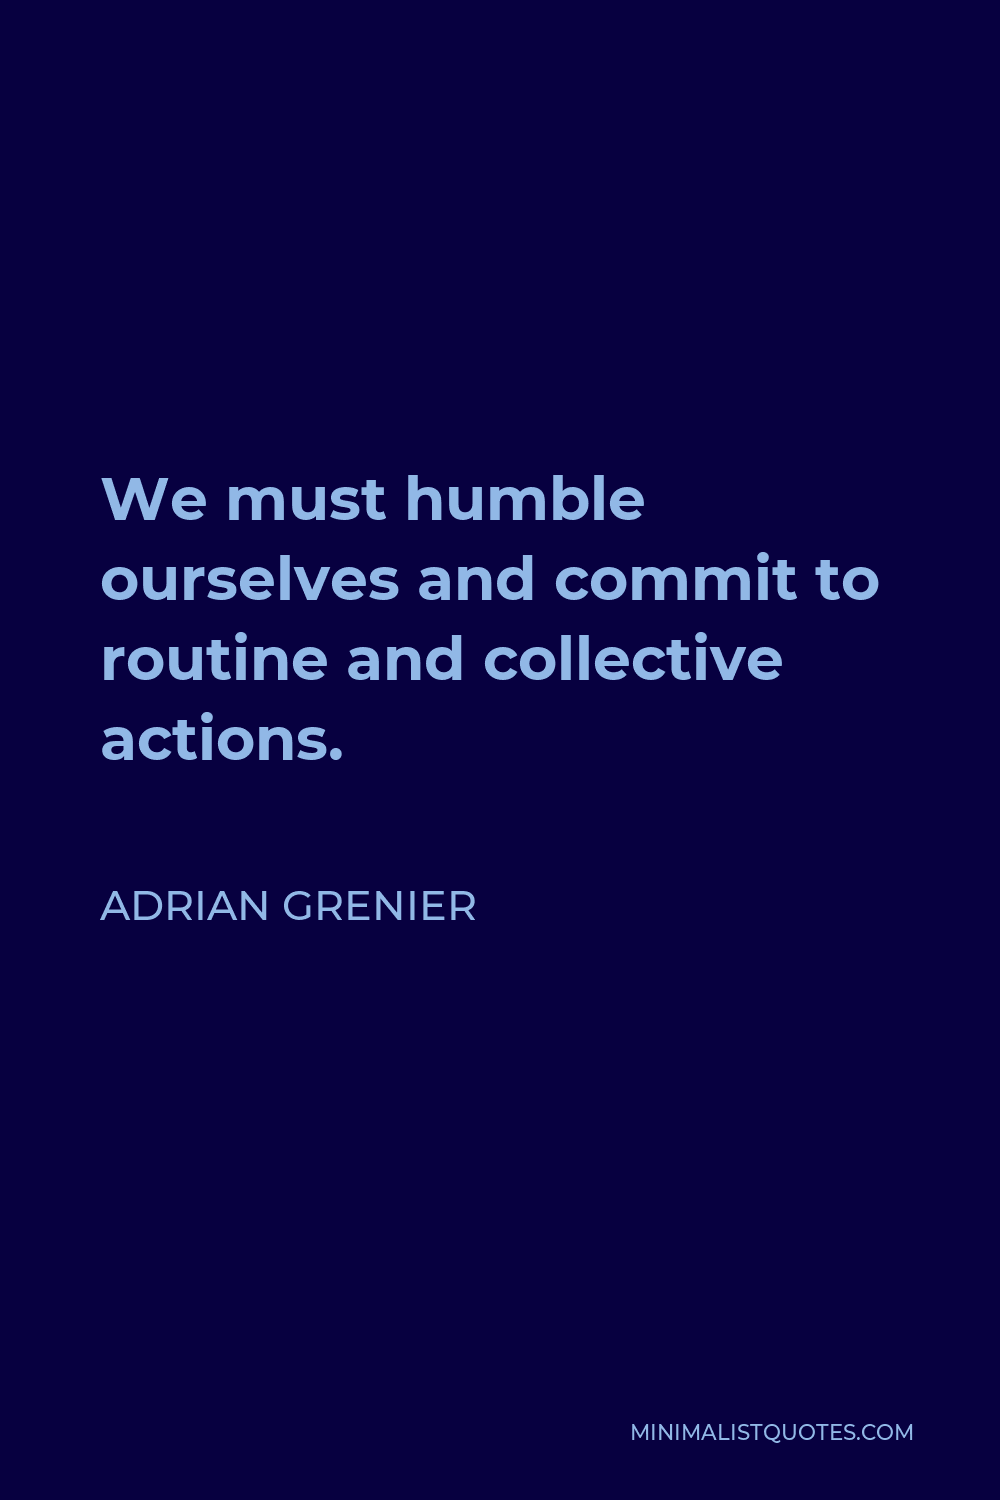 Adrian Grenier Quote - We must humble ourselves and commit to routine and collective actions.